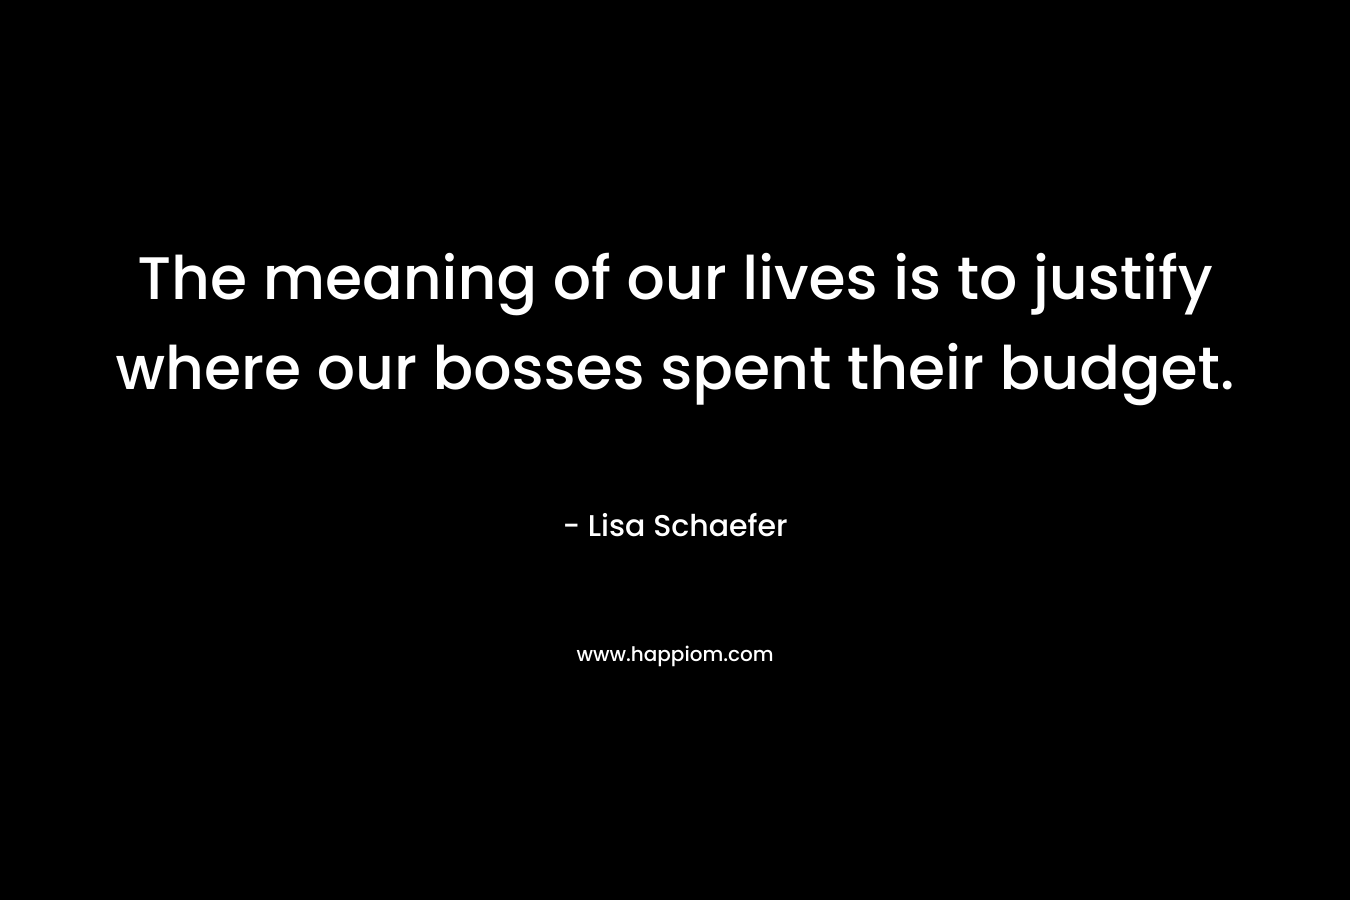 The meaning of our lives is to justify where our bosses spent their budget. – Lisa Schaefer